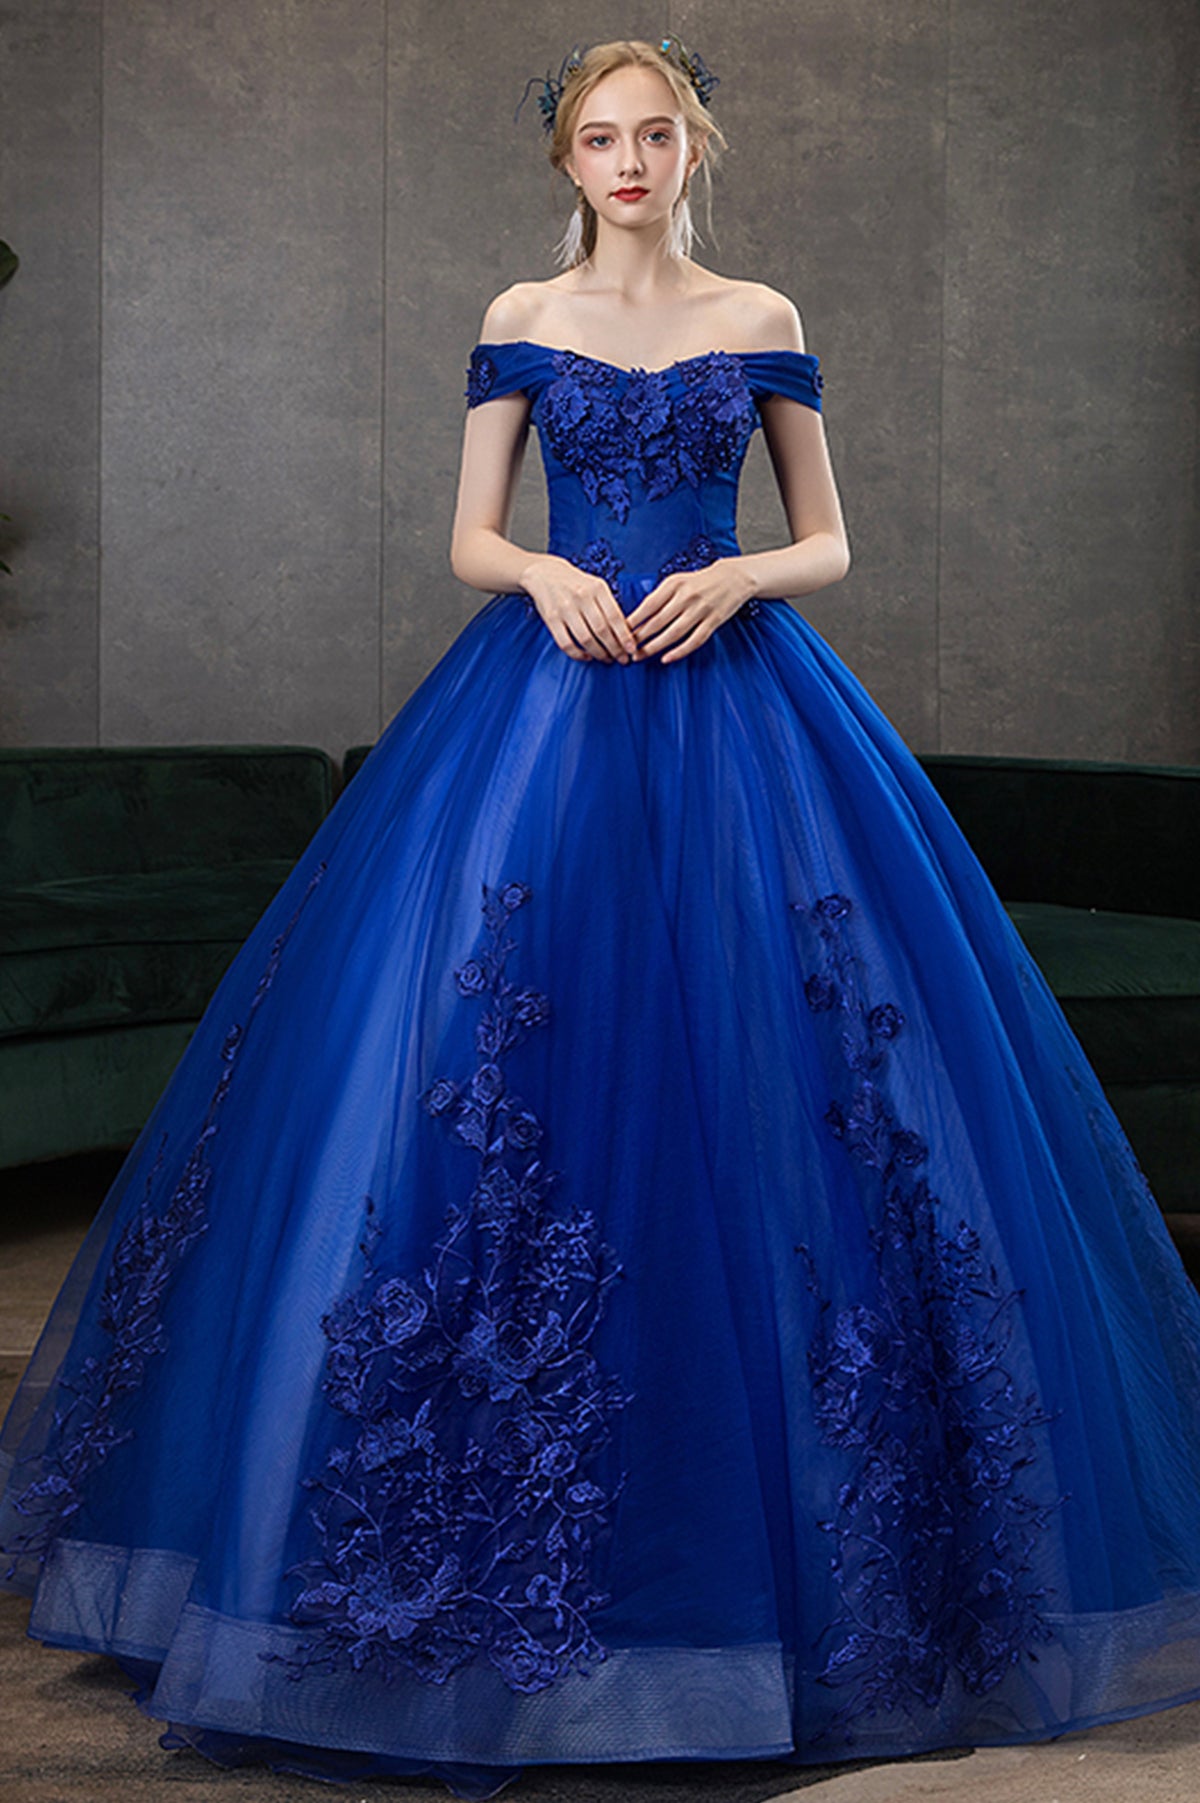 Blue Lace Long A-Line Ball Gown, Blue Off the Shoulder Formal Evening Dress